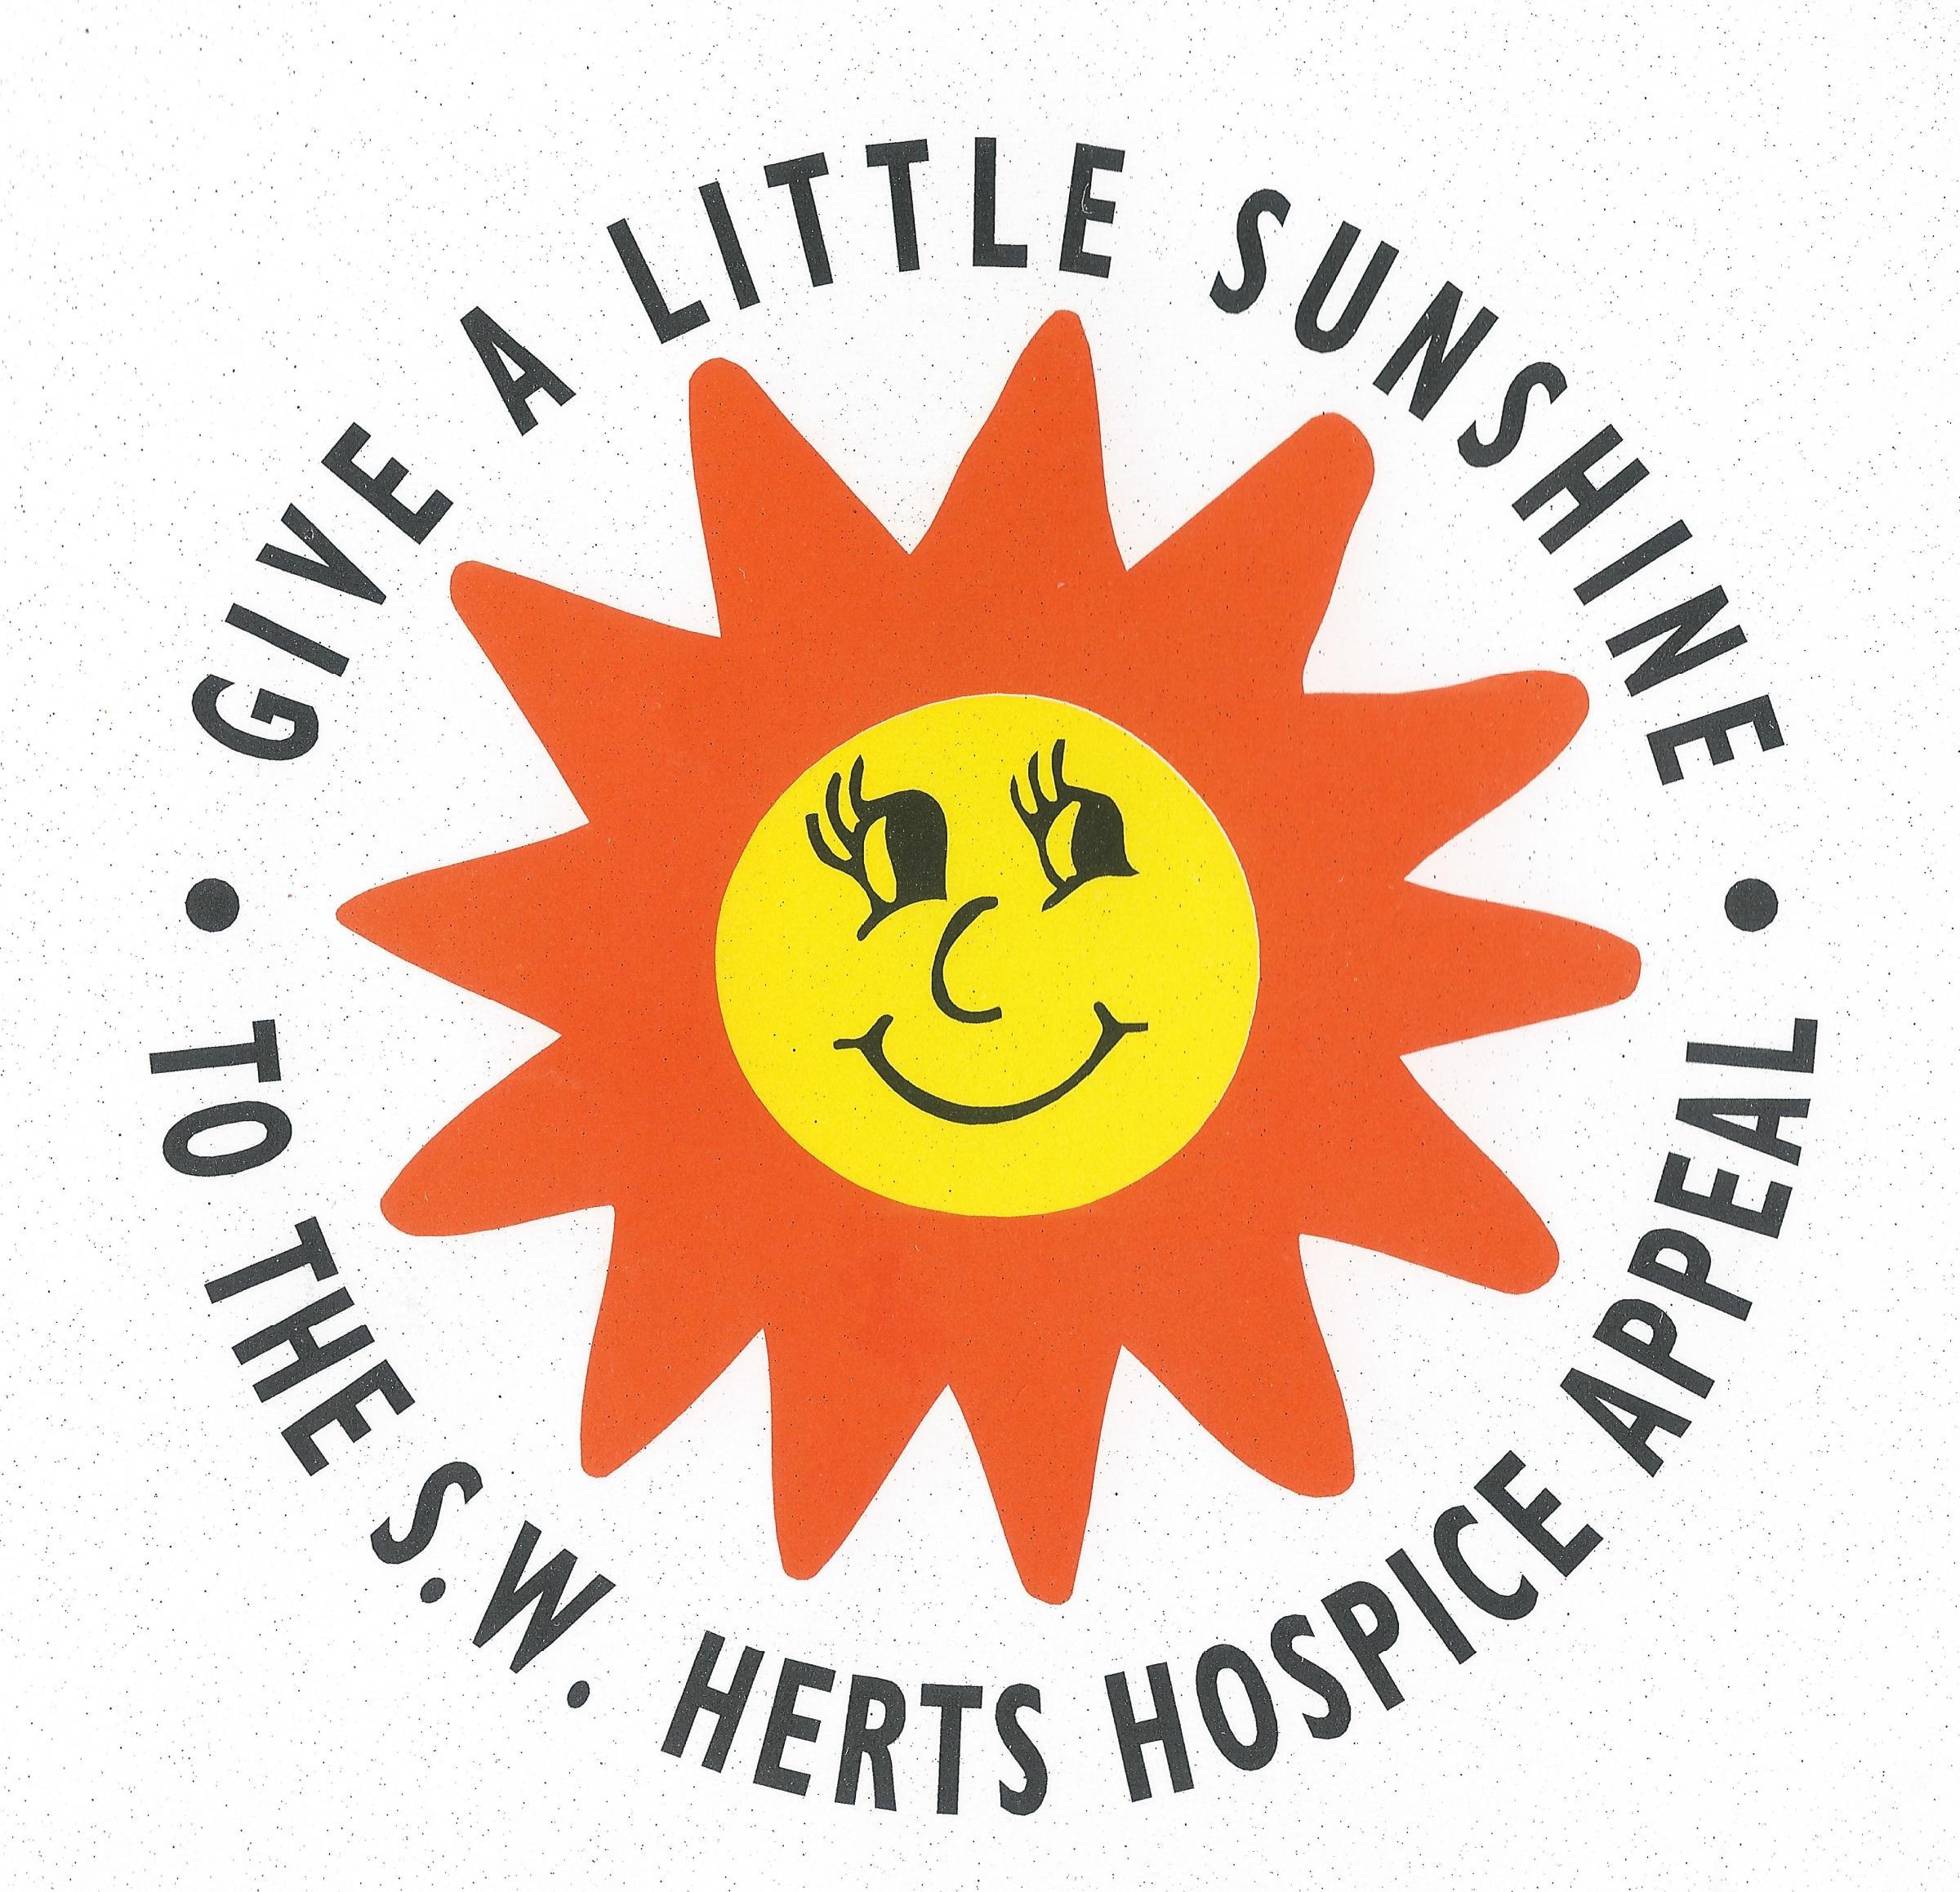 The Hospice Appeal logo